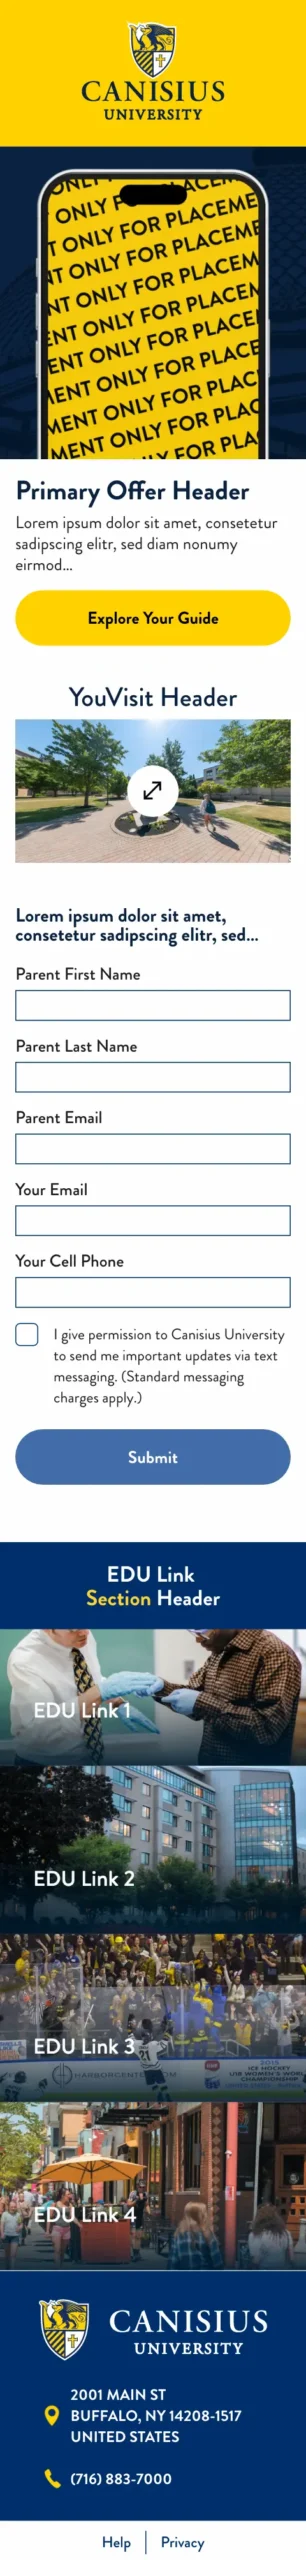 Preview of Canisius University landing page design